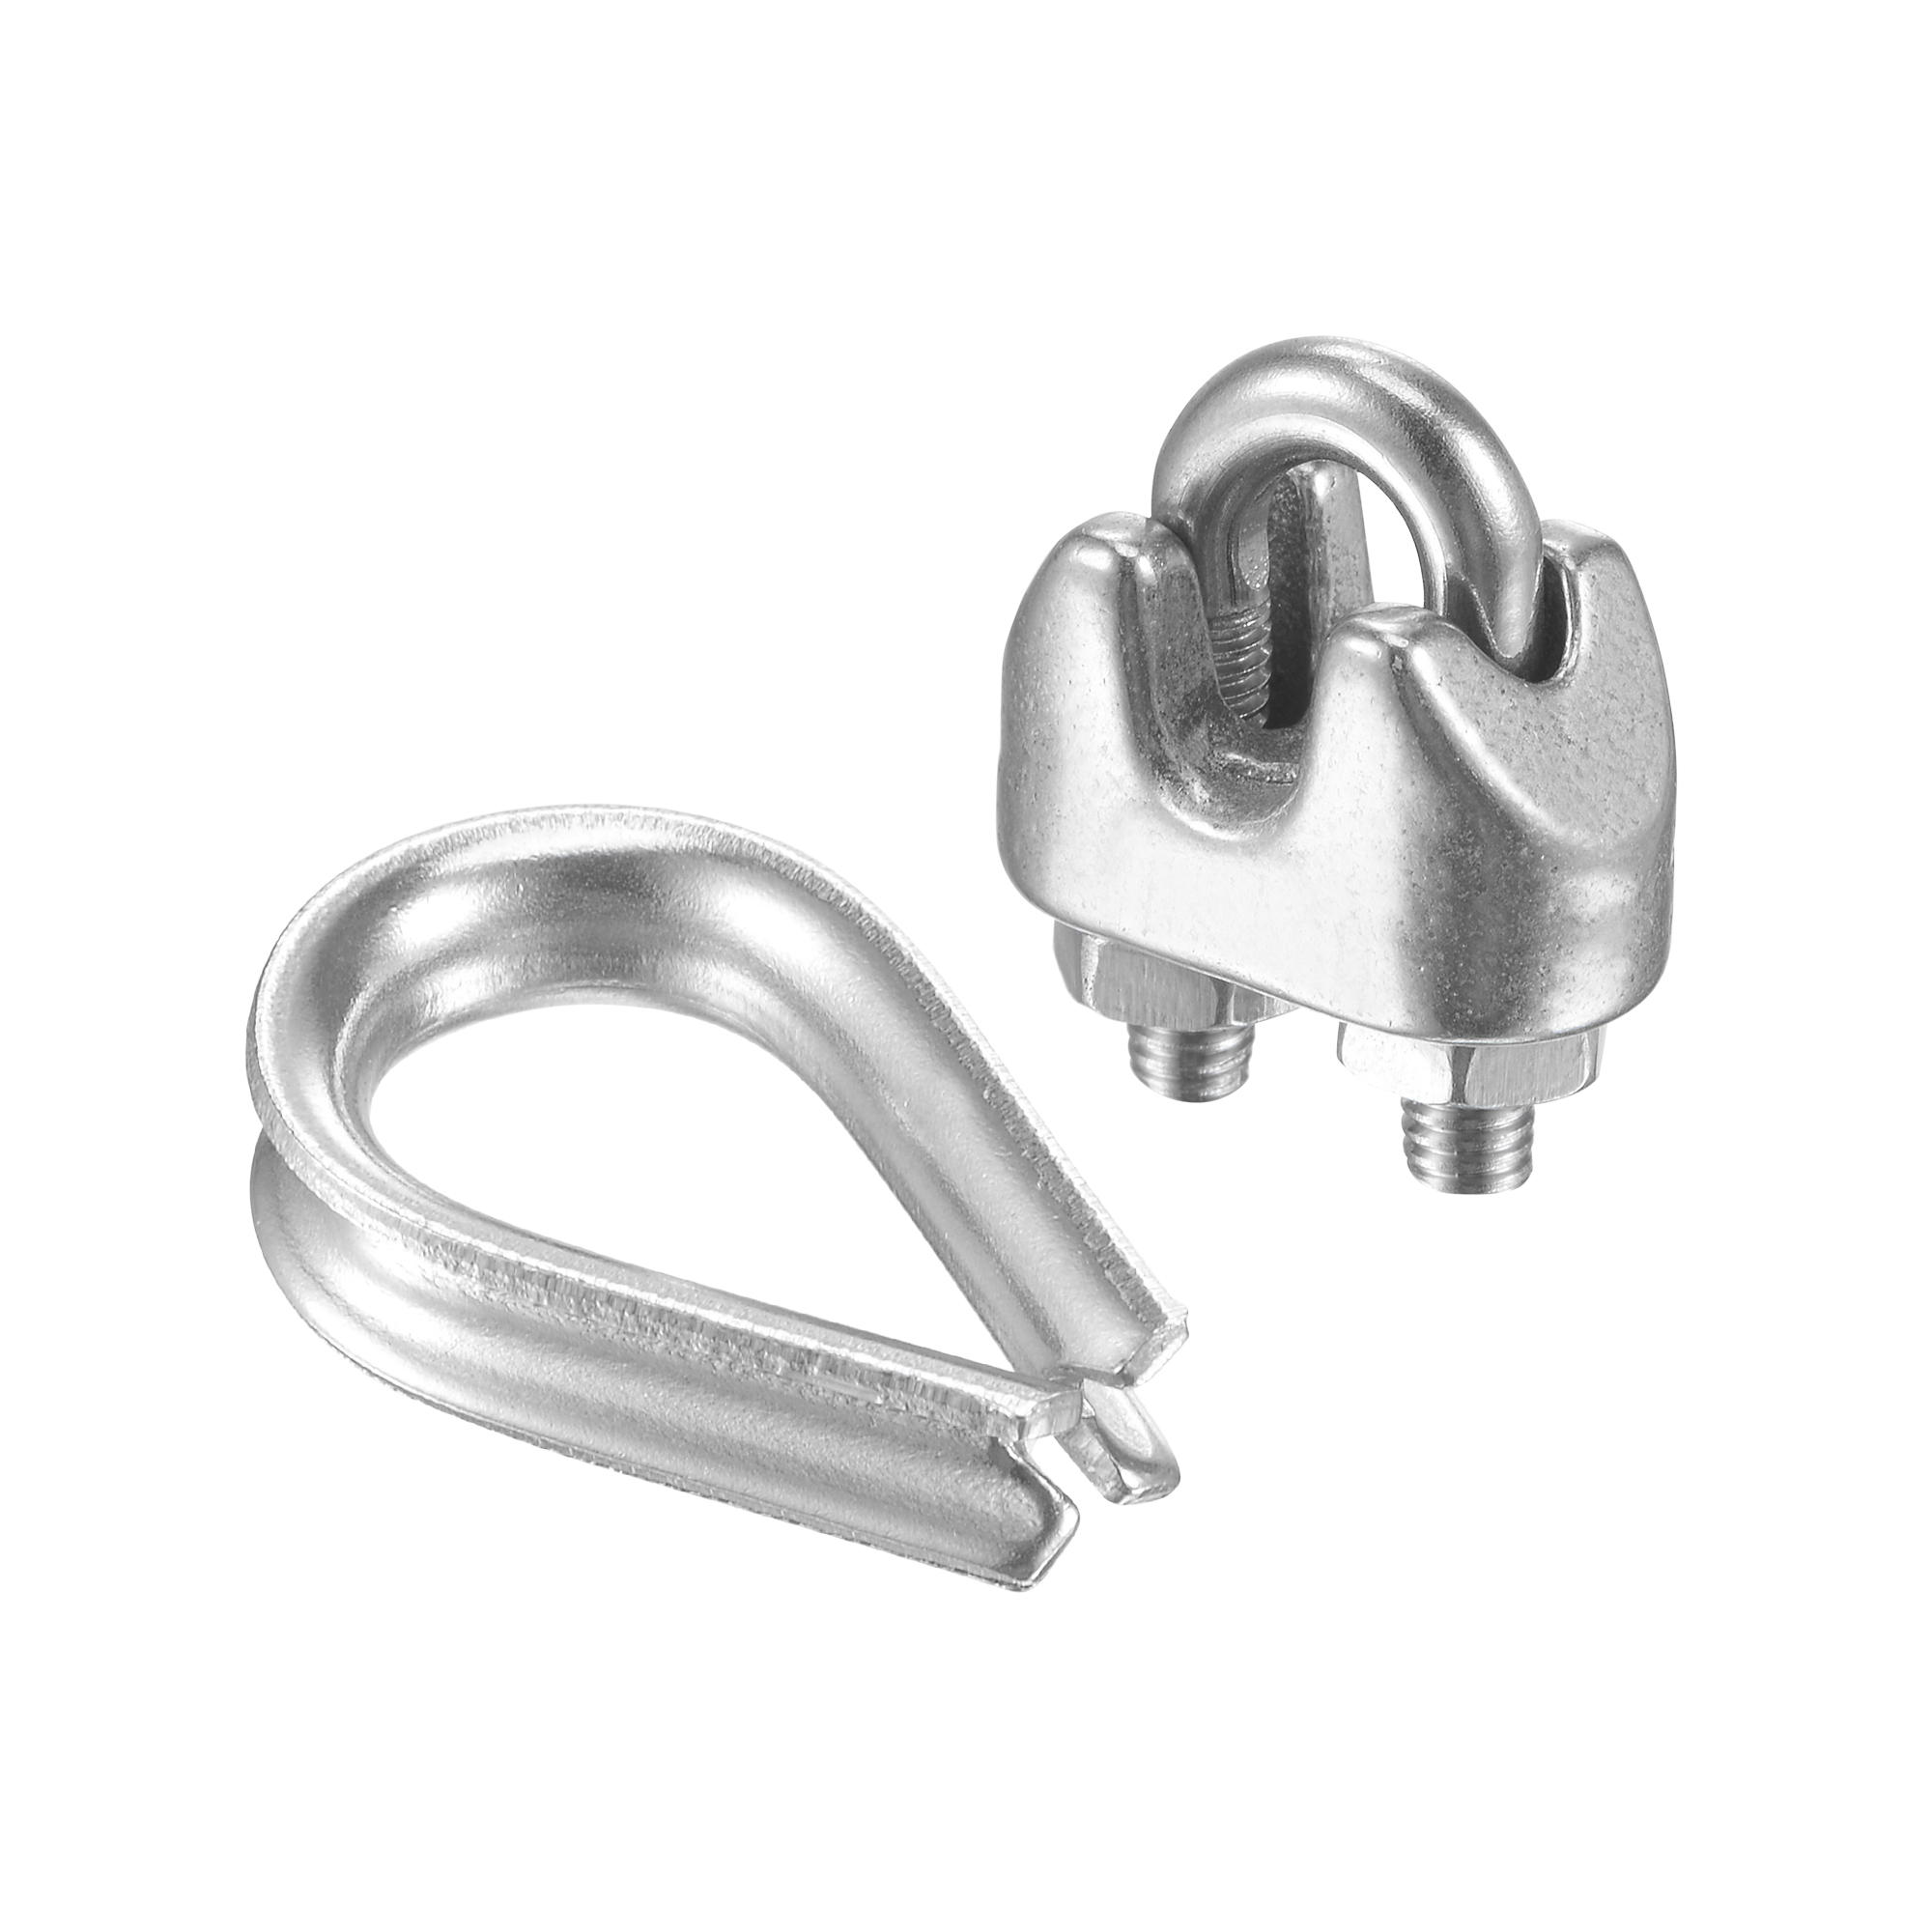 Uxcell M2 Stainless Steel Wire Rope Clip Kit, Included Rope Clamp 10 Pack Thimble Rigging 10 Pack - image 1 of 7